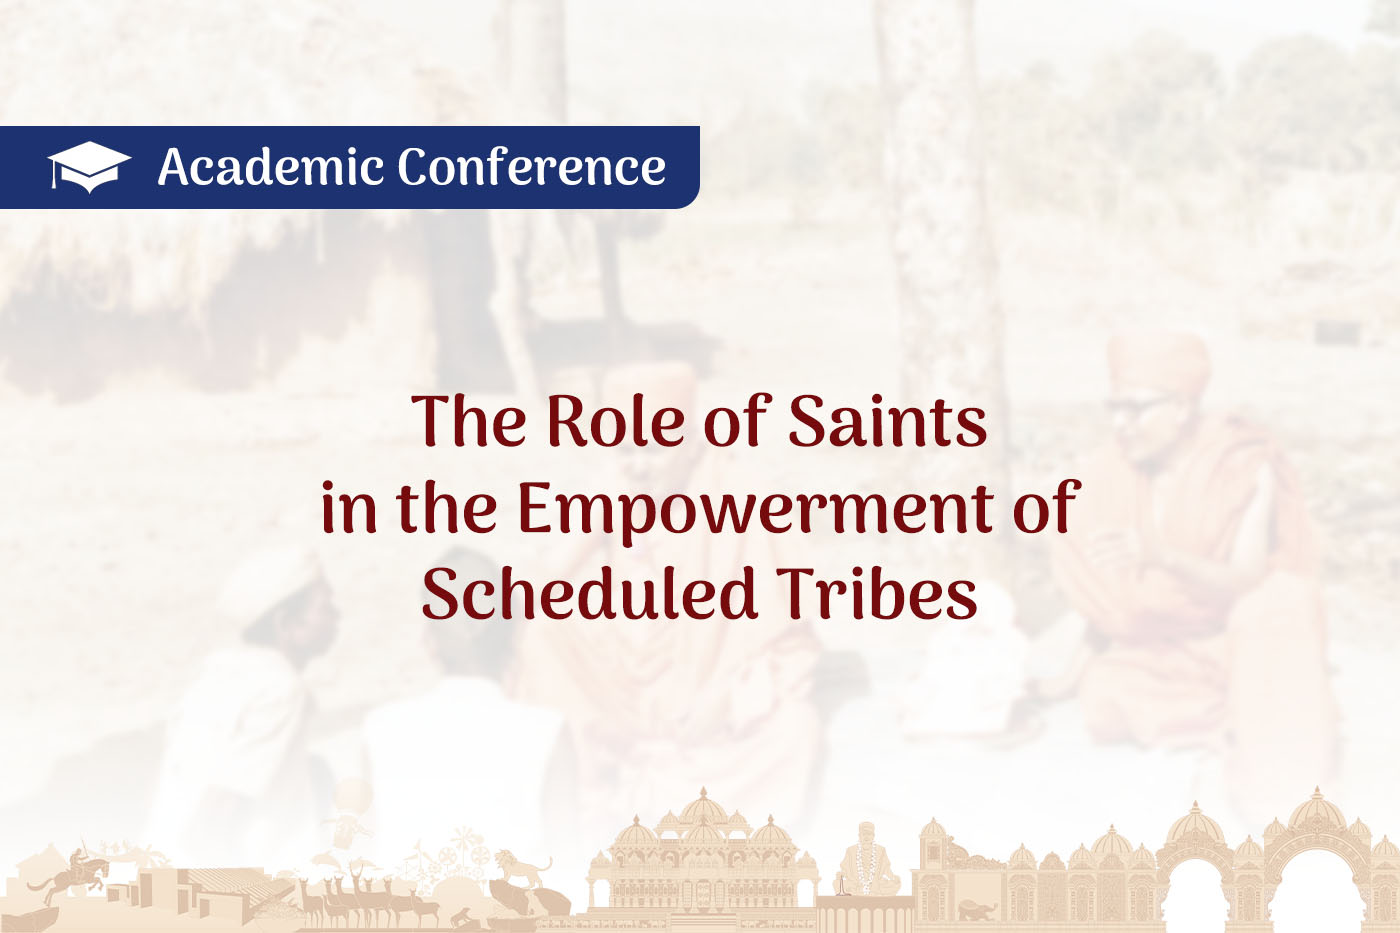 The Role of Saints in the Empowerment of Scheduled Tribes